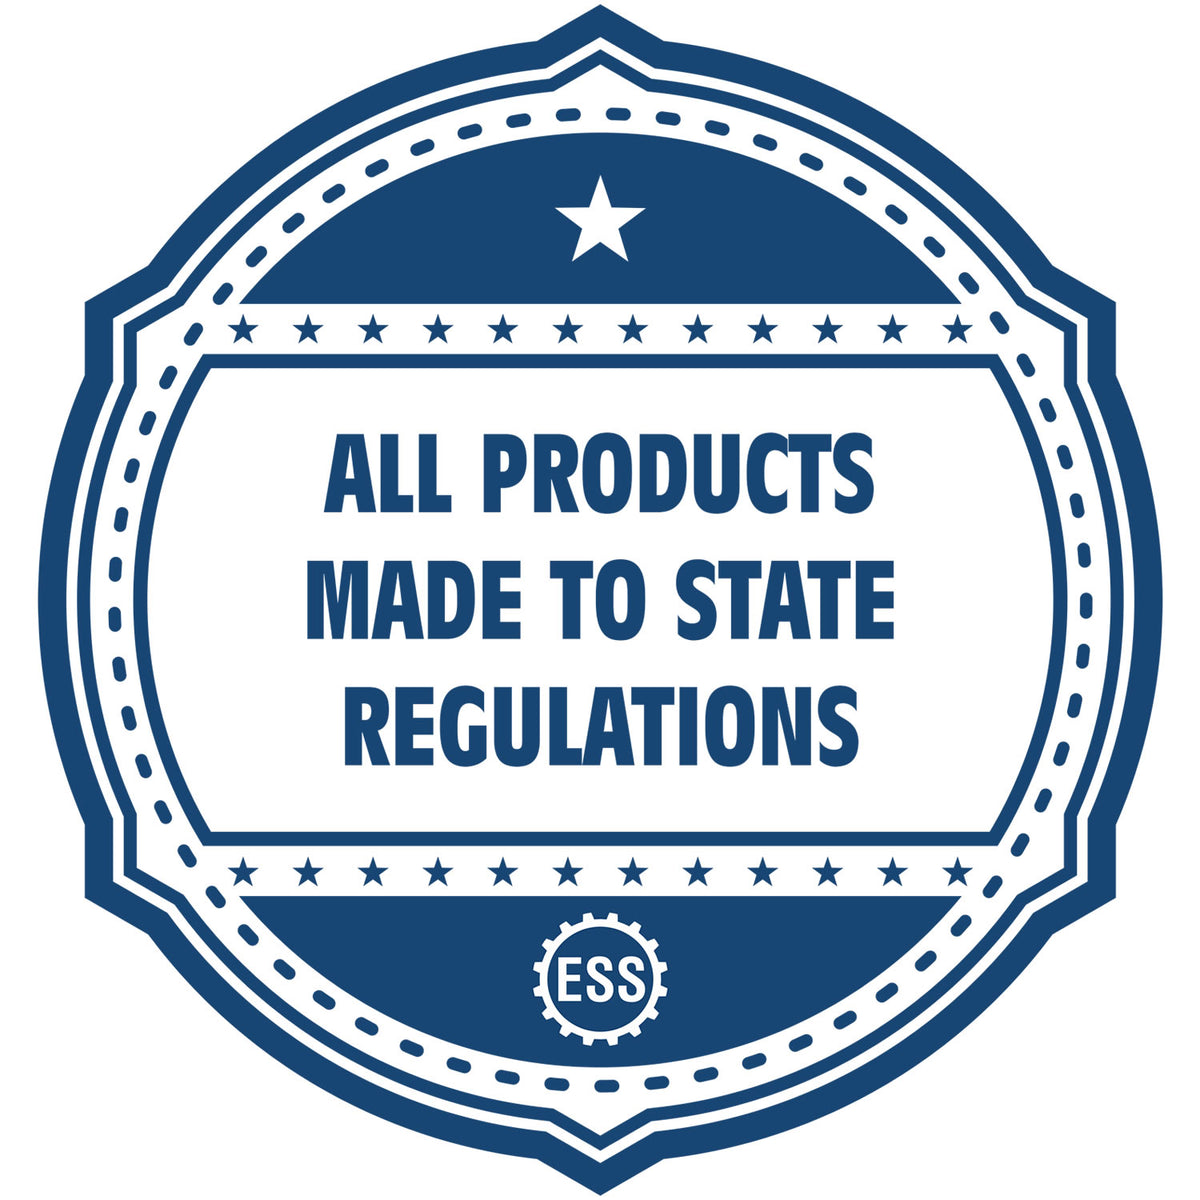 An icon or badge element for the State of Massachusetts Soft Land Surveyor Embossing Seal showing that this product is made in compliance with state regulations.